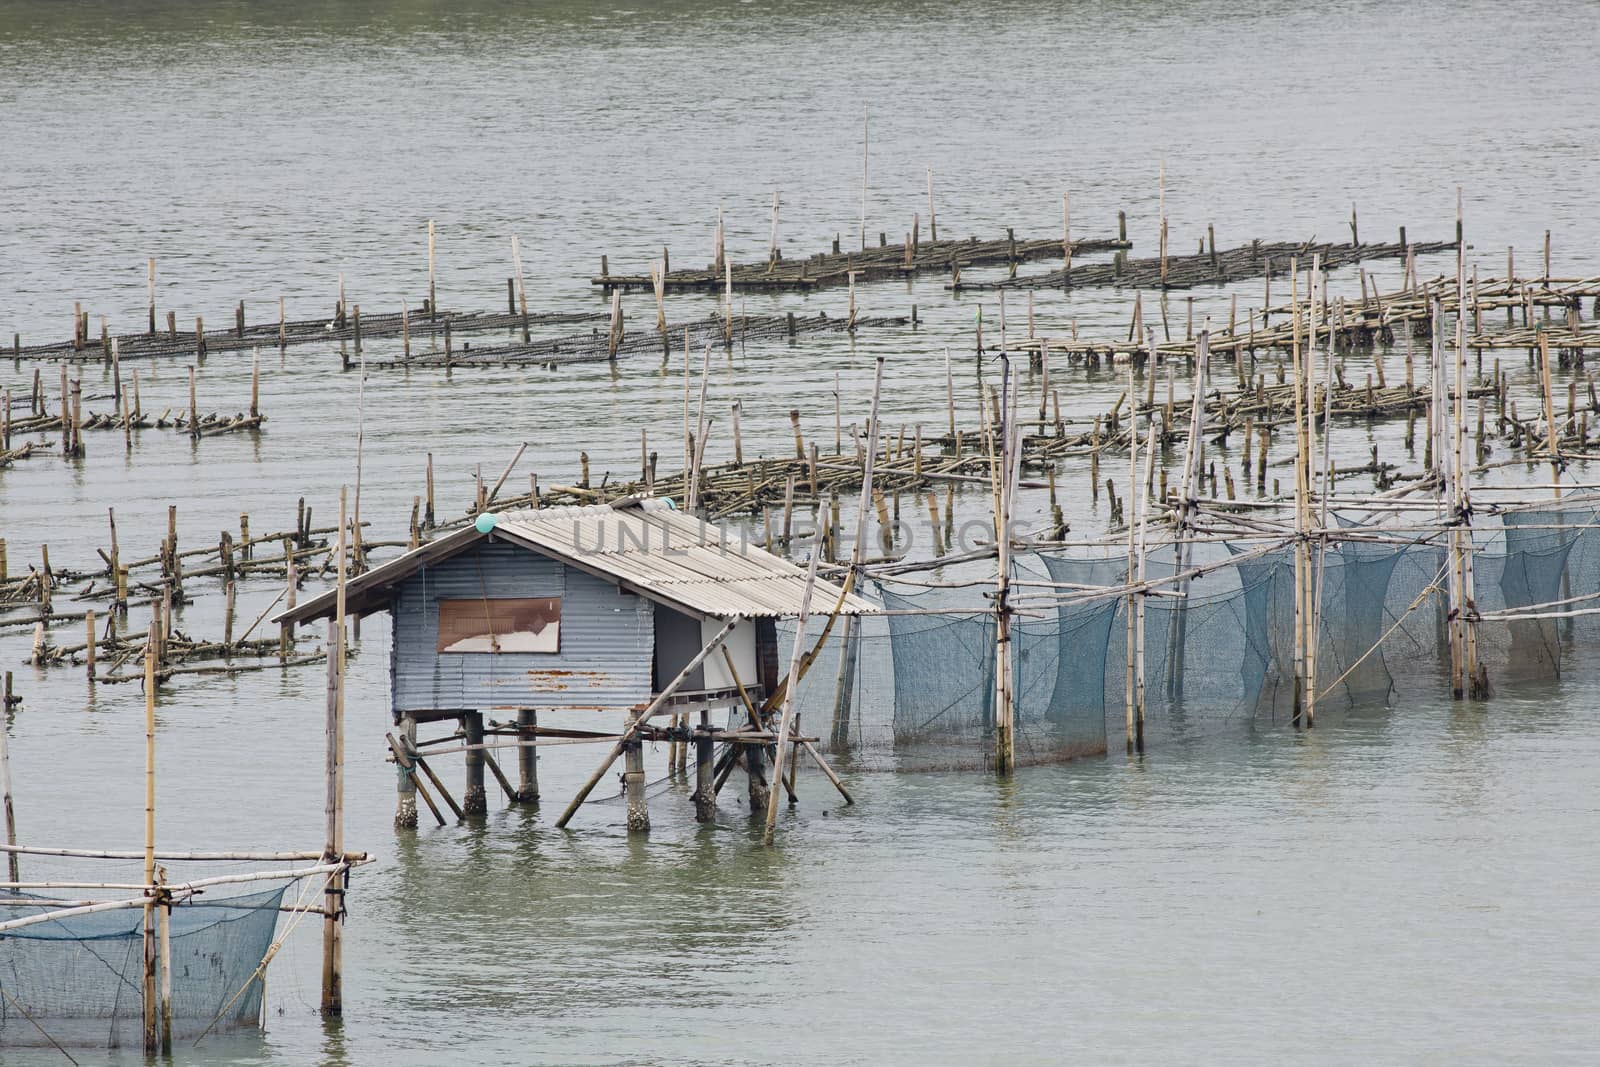 The coop for feeding fish in east of Thailand sea. by art9858